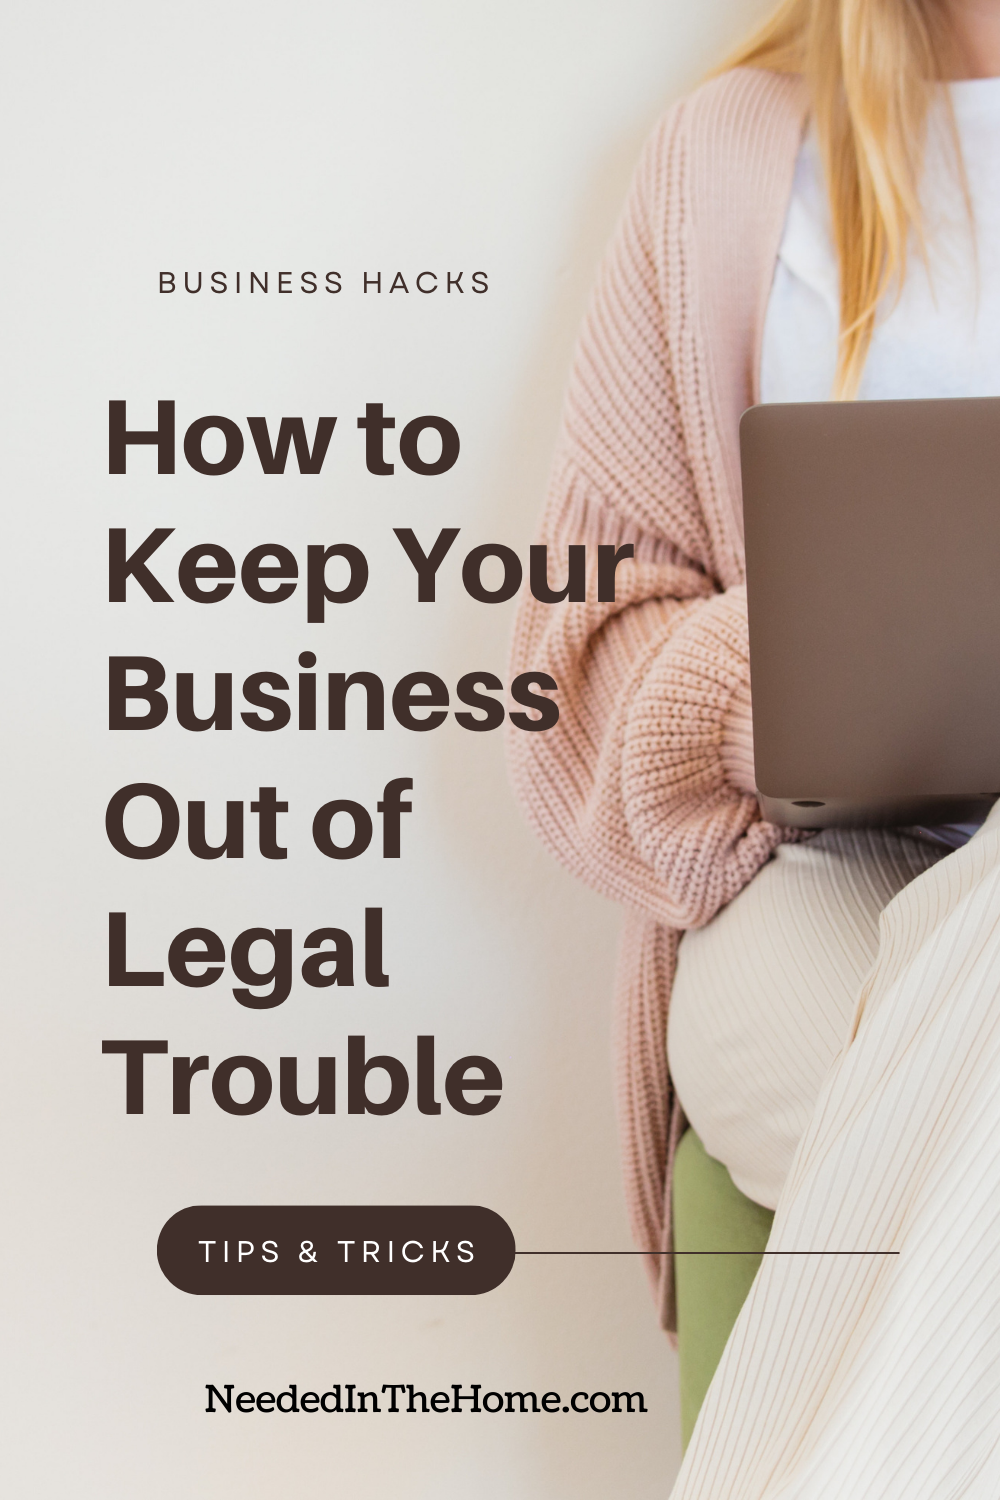 pinterest-pin-description business hacks how to keep your business out of legal trouble tips and tricks neededinthehome woman on laptop